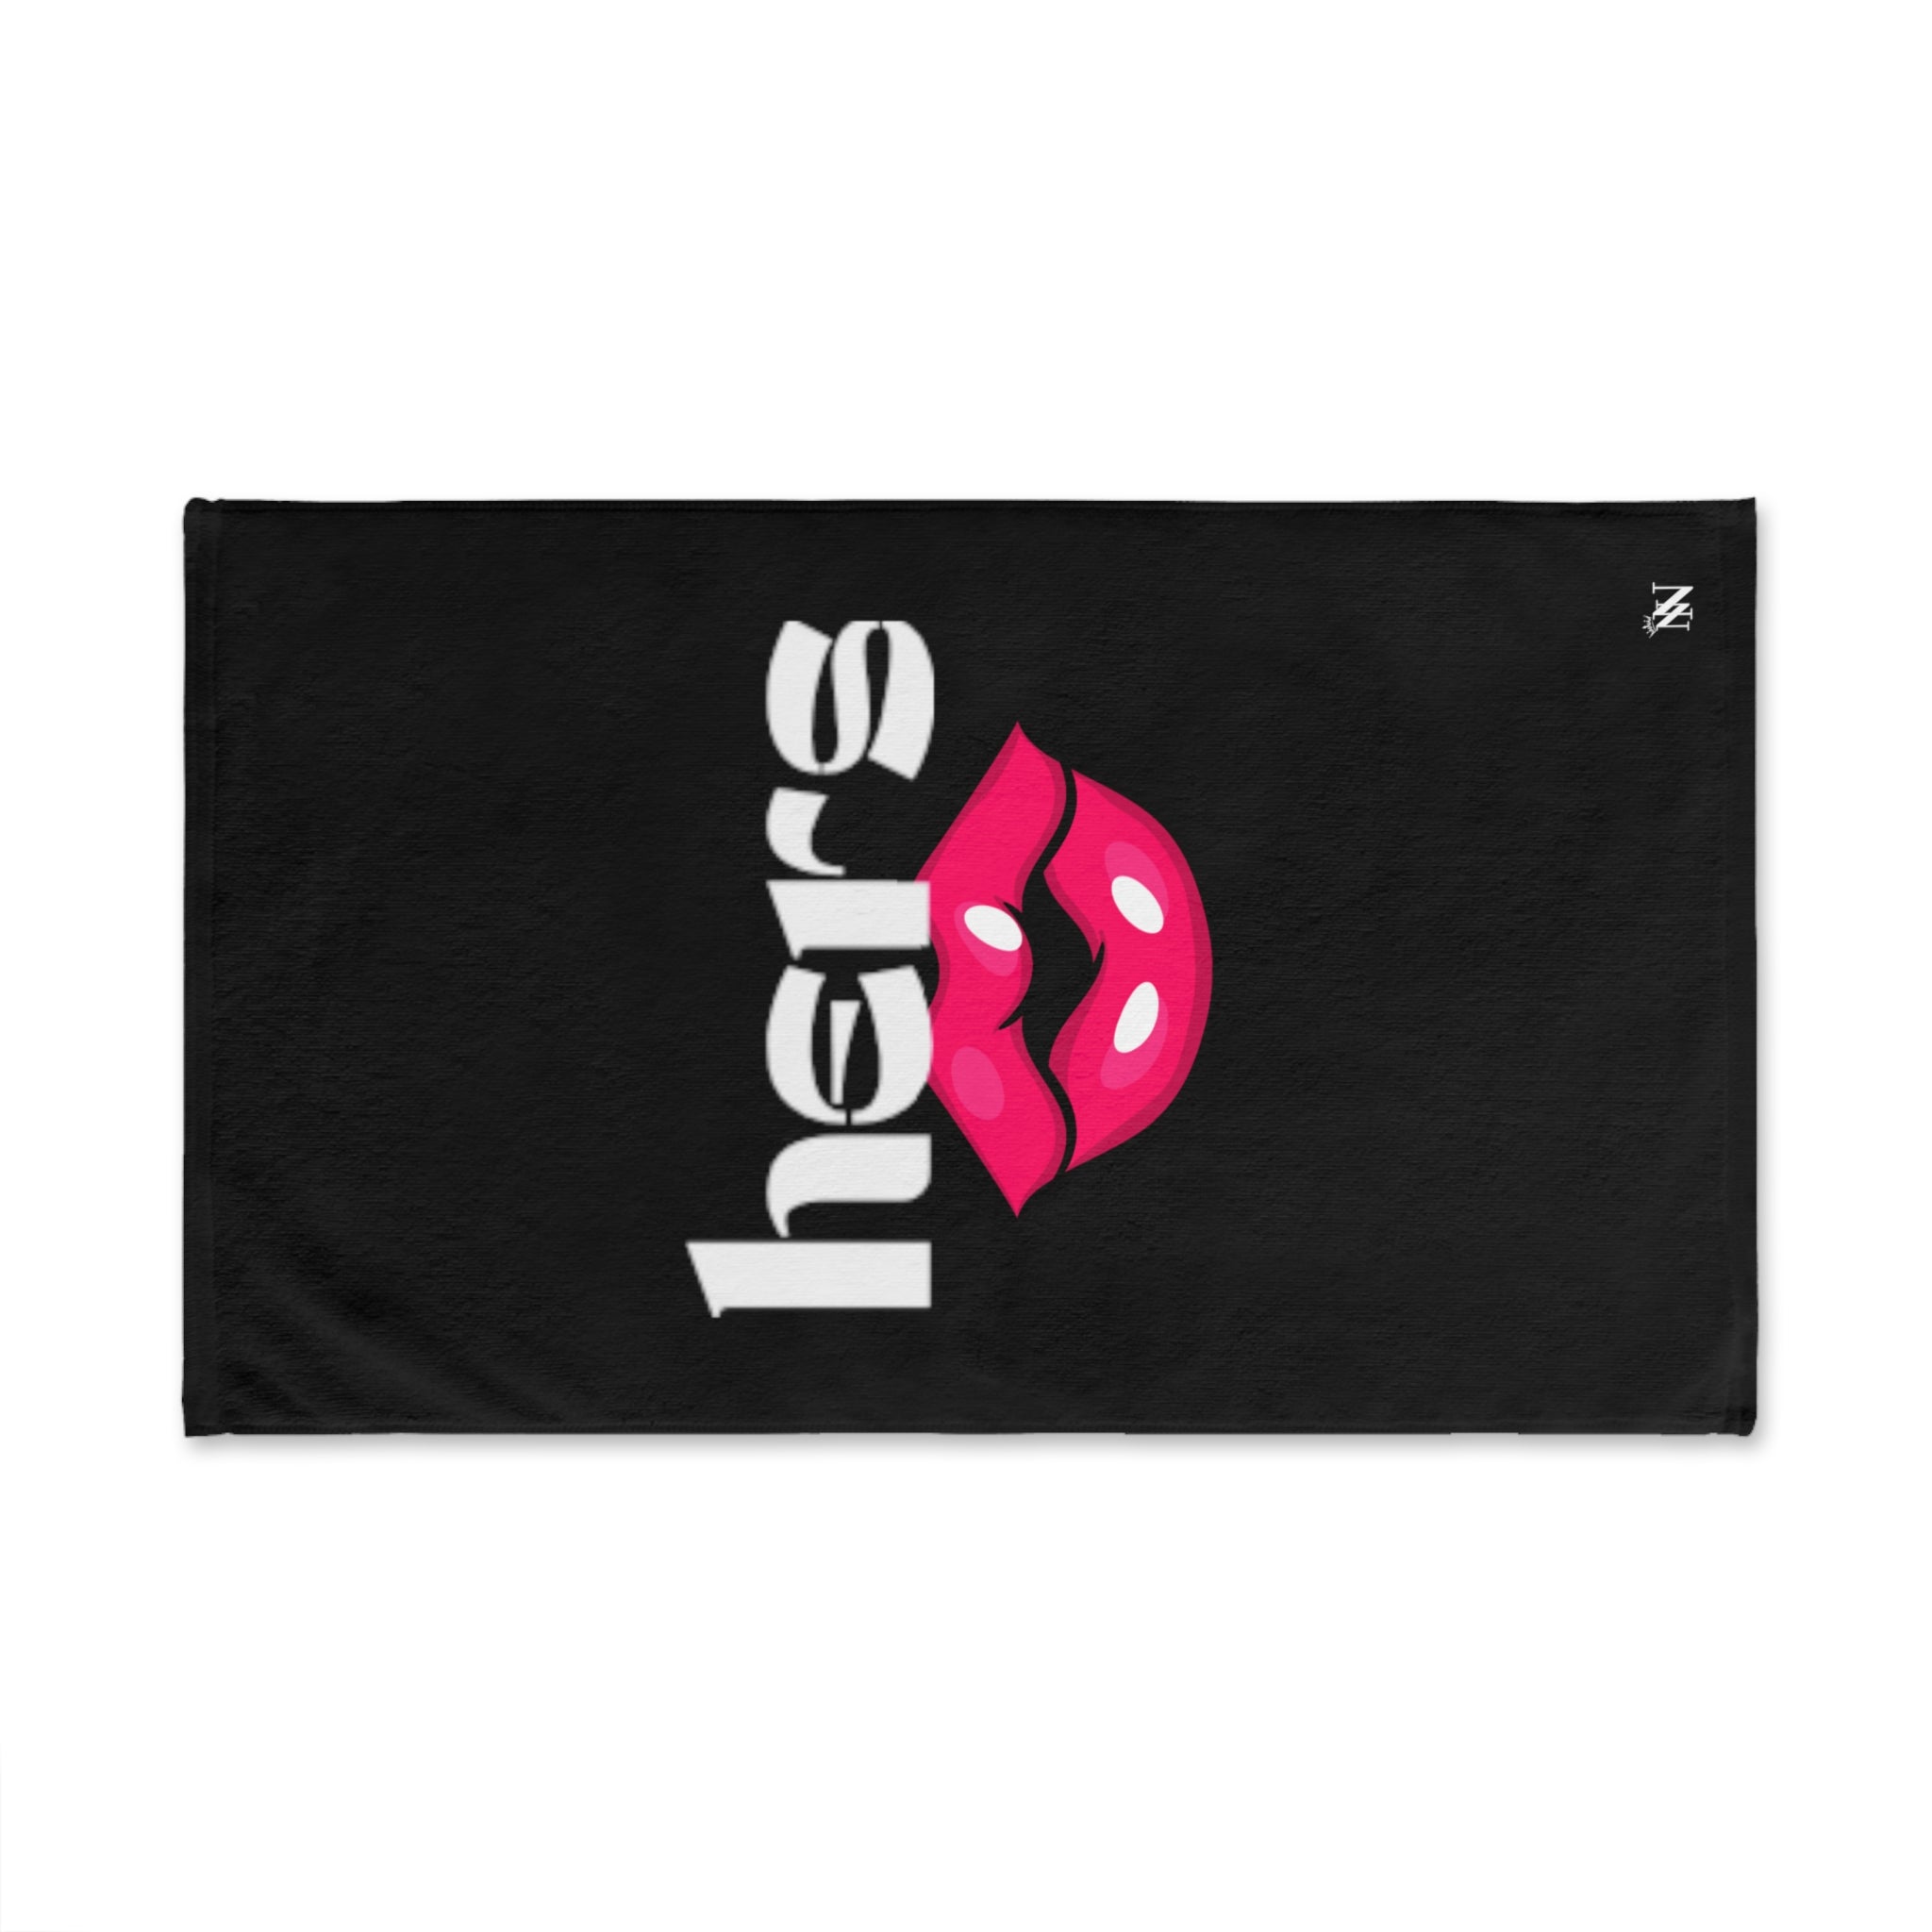 Shiny Kiss Giant Black | Sexy Gifts for Boyfriend, Funny Towel Romantic Gift for Wedding Couple Fiance First Year 2nd Anniversary Valentines, Party Gag Gifts, Joke Humor Cloth for Husband Men BF NECTAR NAPKINS